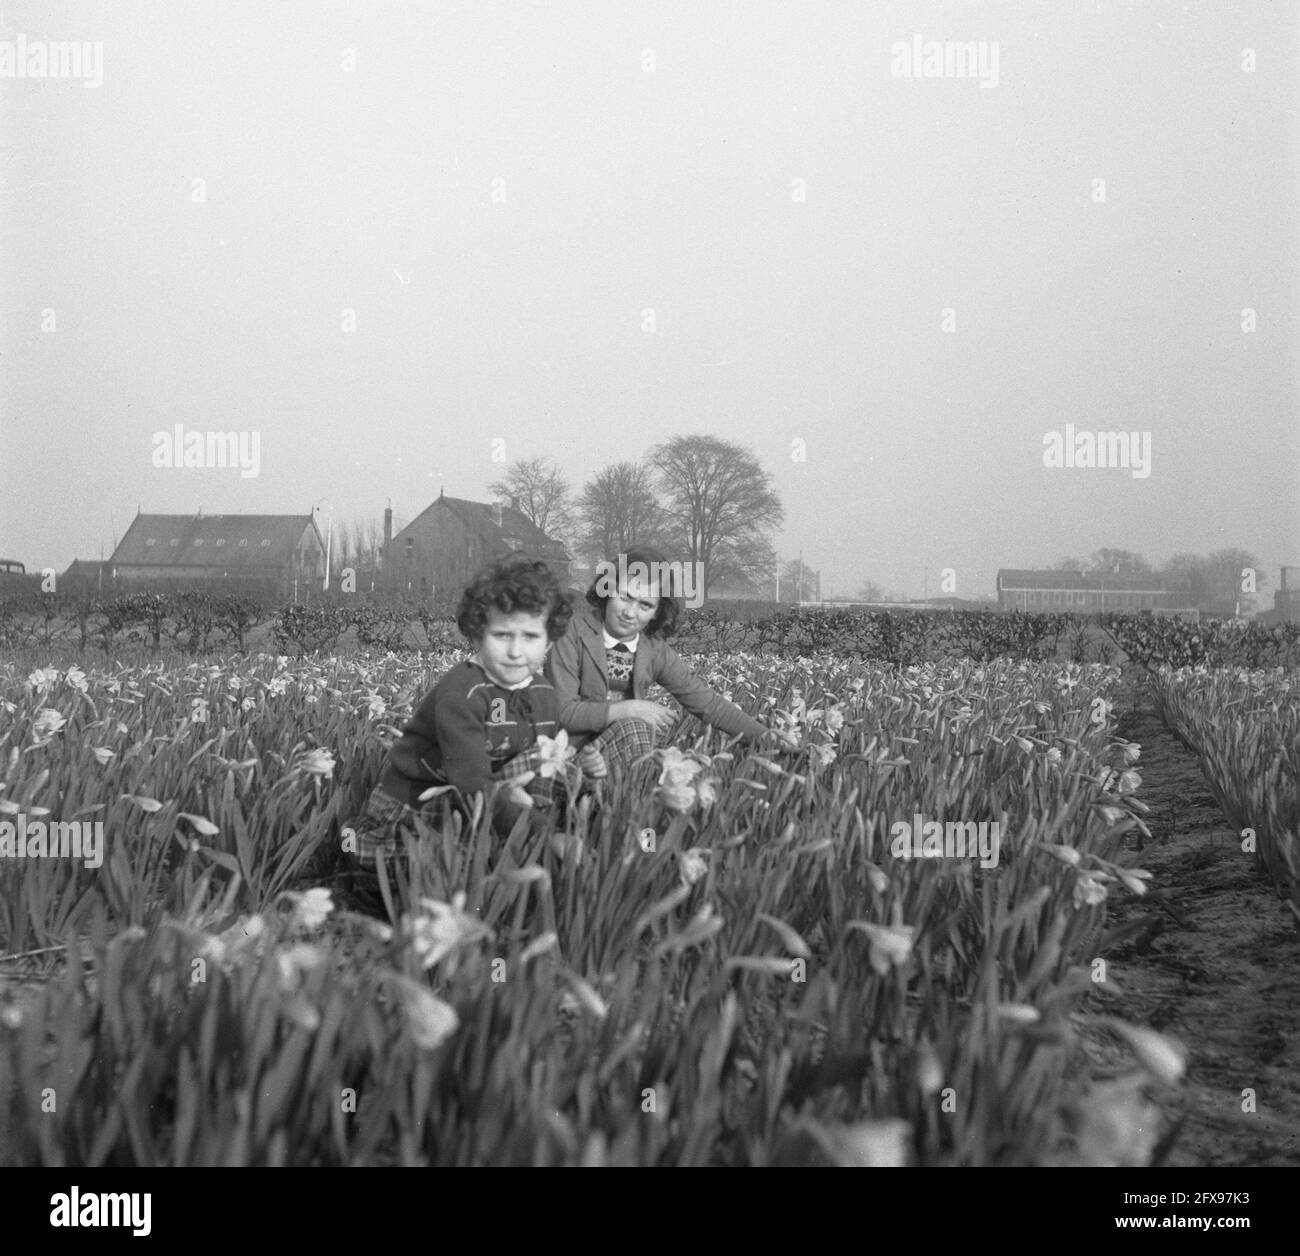 Flower plate girls in daffodil field, March 20, 1952, GIRLS, The Netherlands, 20th century press agency photo, news to remember, documentary, historic photography 1945-1990, visual stories, human history of the Twentieth Century, capturing moments in time Stock Photo